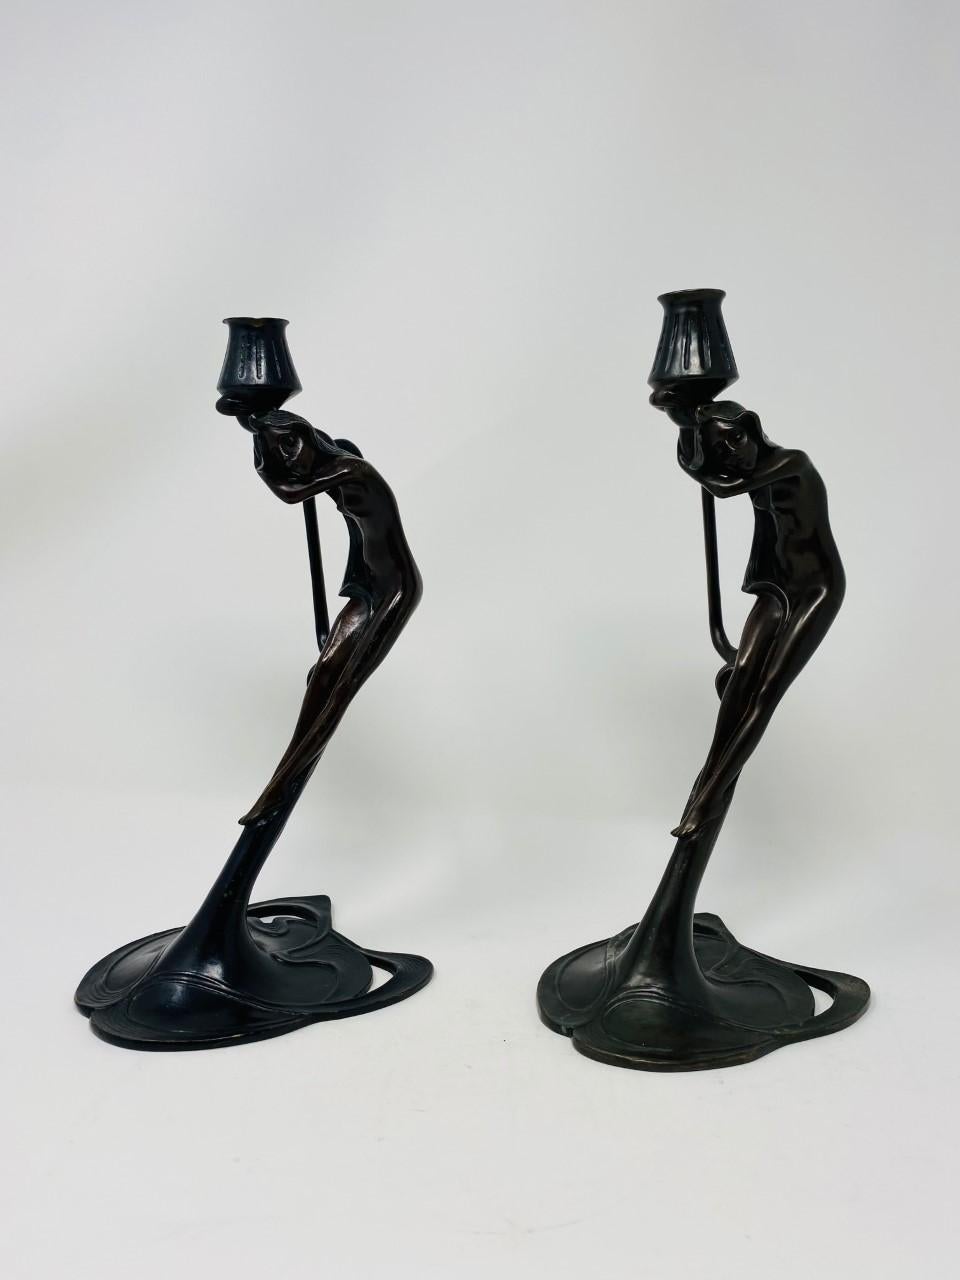 Cast Vintage Art Deco Bronze Nymph Sculpture Candle Holders by MMA